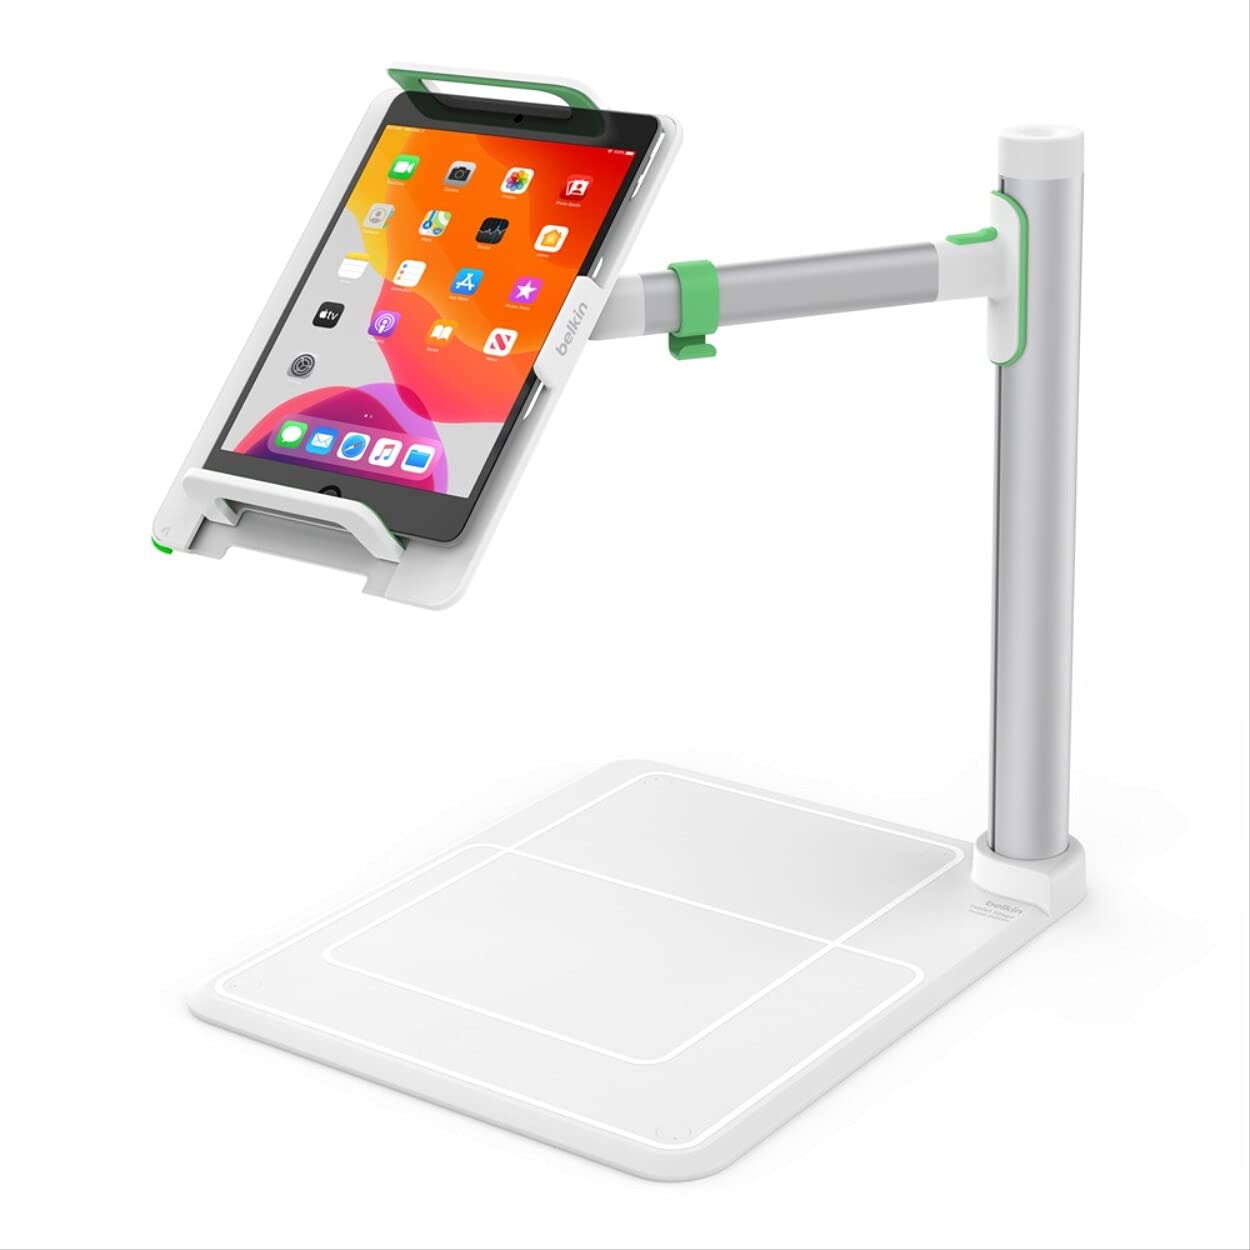 Belkin Tablet Stage Stand For Presenters, Lecturers & Teachers- Adjustable & Portable Tablet Holder Designed For Schools & Classrooms - For iPad, iPad Pro, iPad Mini, Galaxy S4, Surface Pro & More